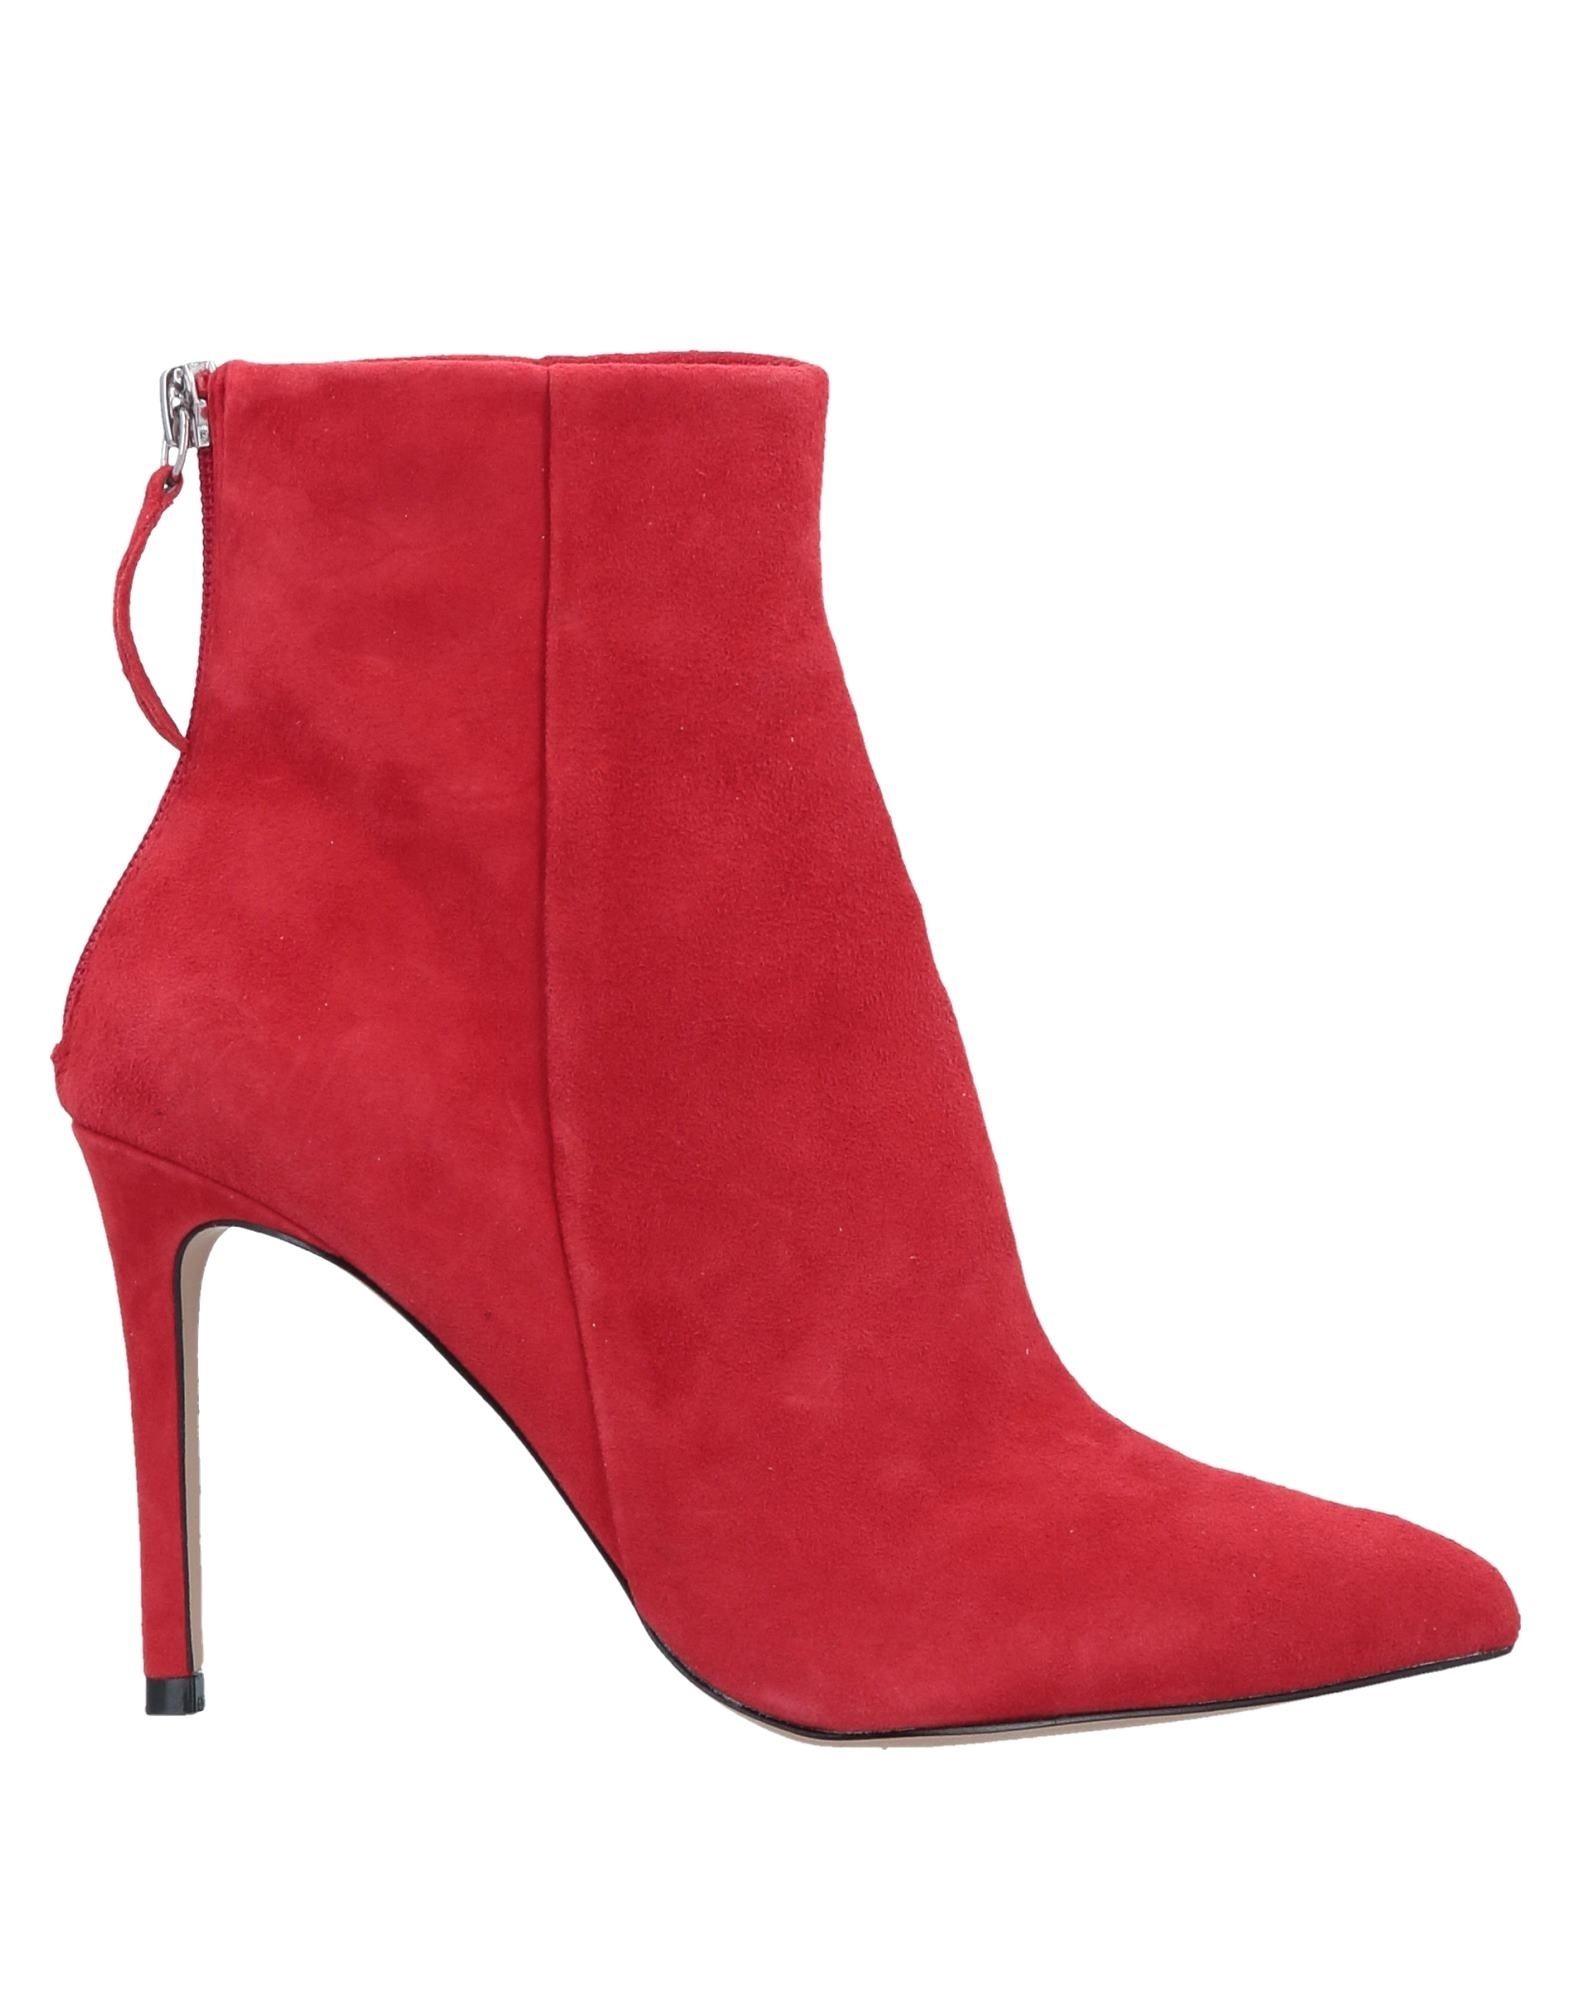 Steve Madden Ankle Boots in Red - Lyst